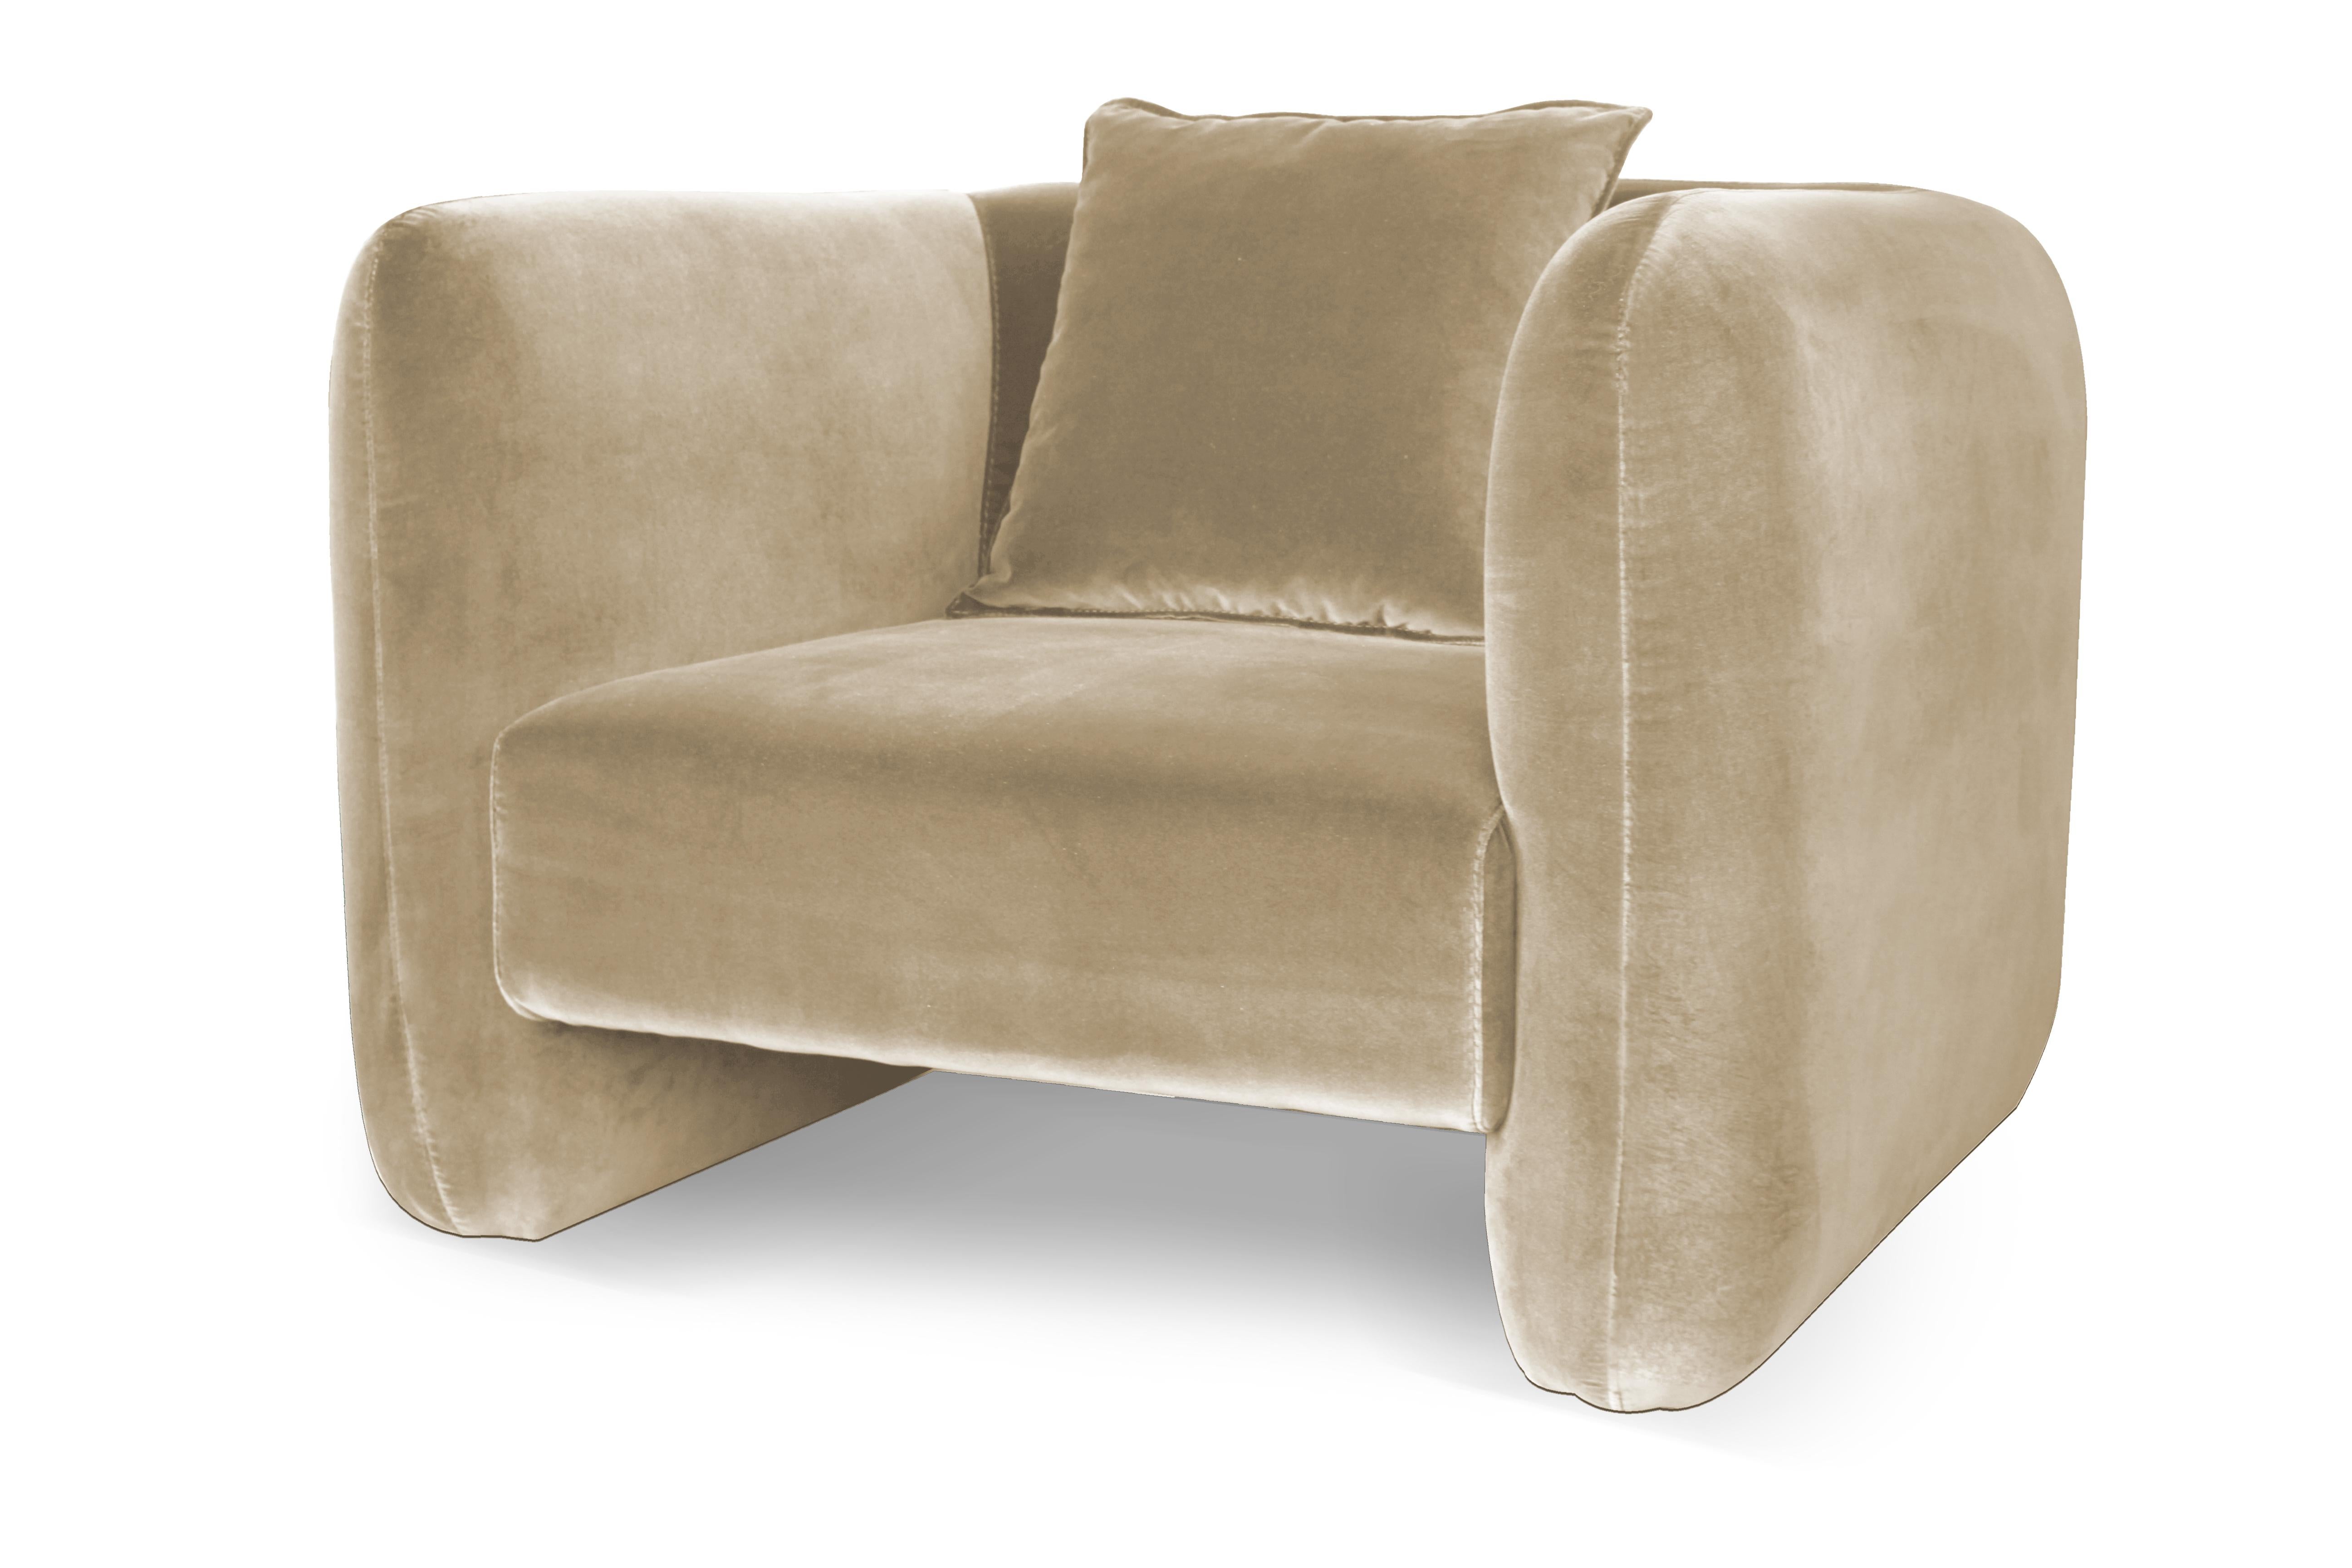 Contemporary Modern Jacob Armchair in Beige Fabric by Collector Studio

This fun and sophisticated 21st century armchair designed by Collector Studio, with its simple shape and attractive color game along with other possible combinations of